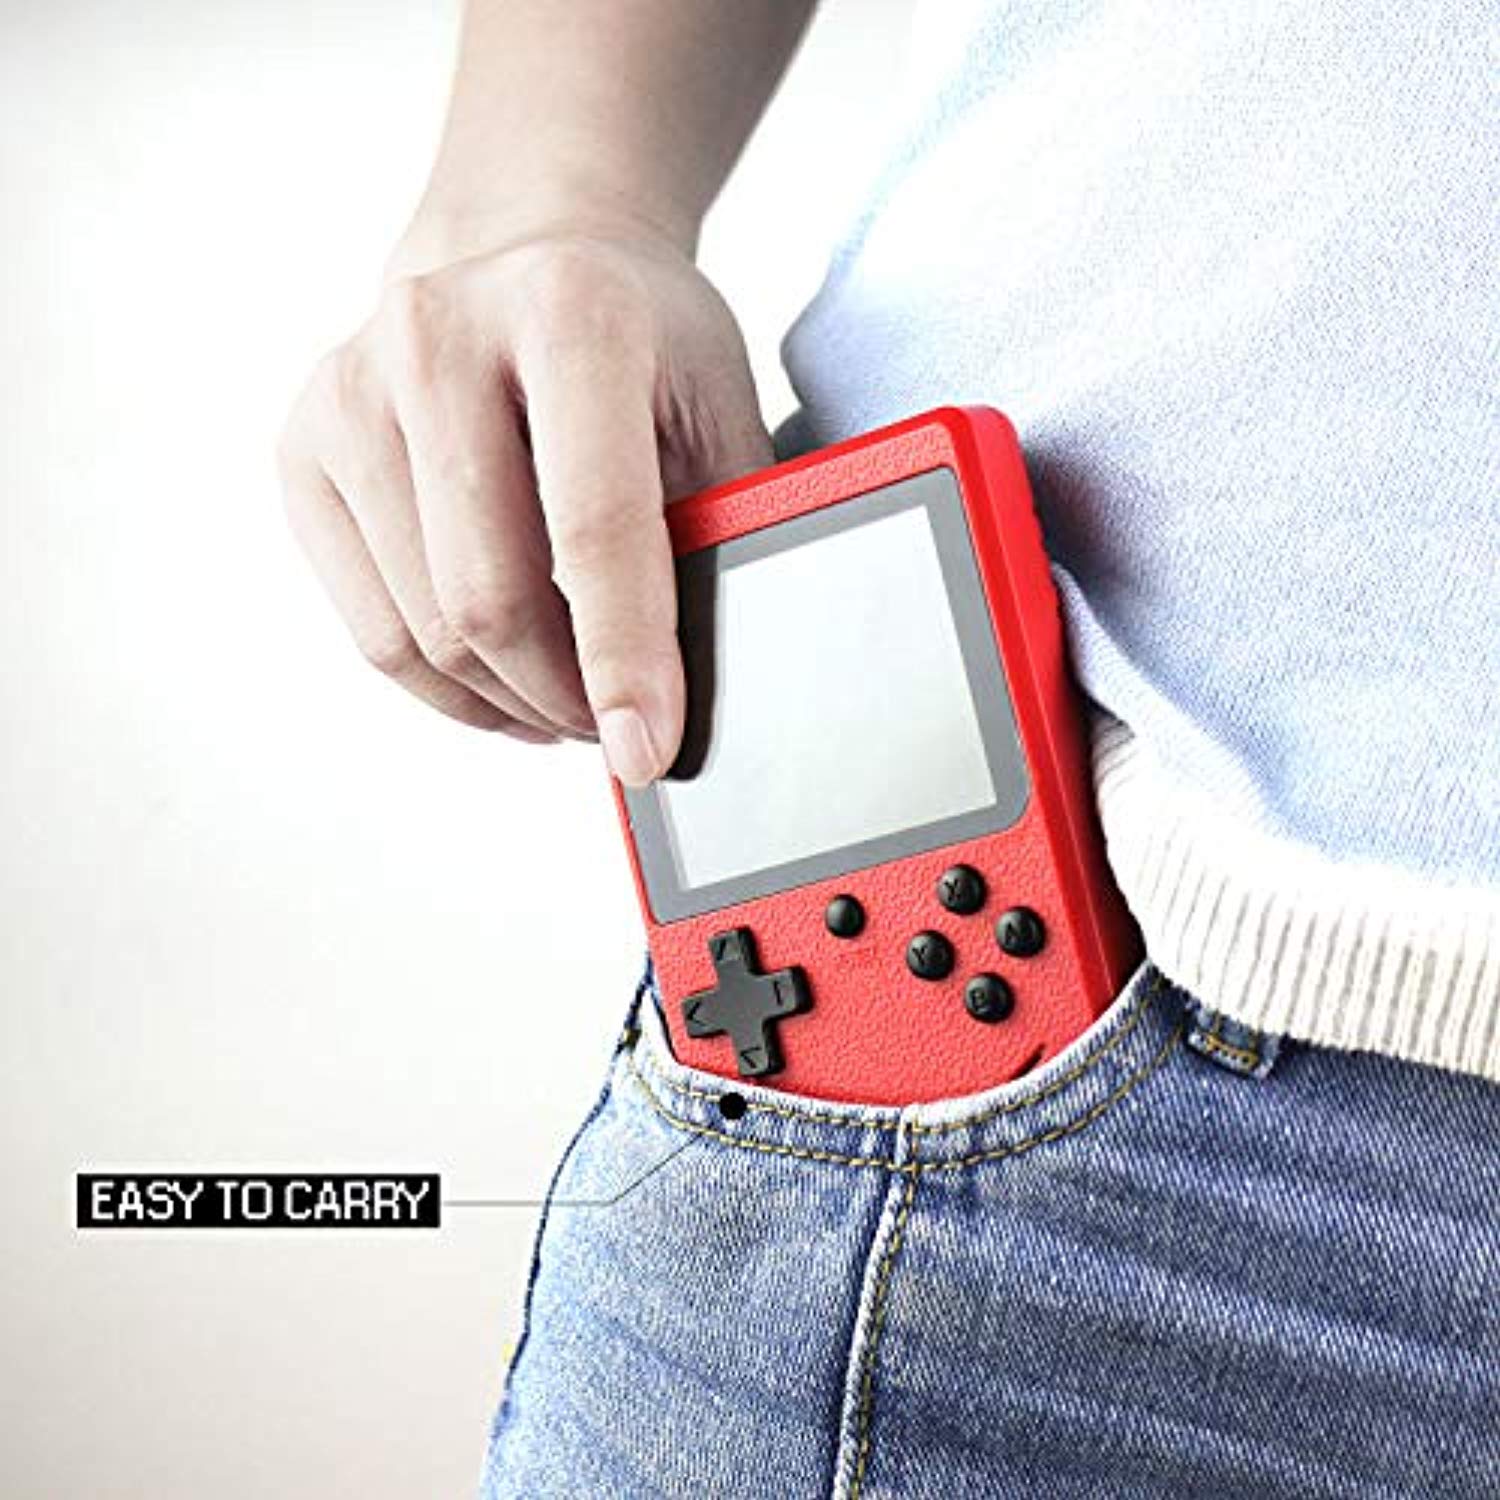 jamswall handheld game console game list